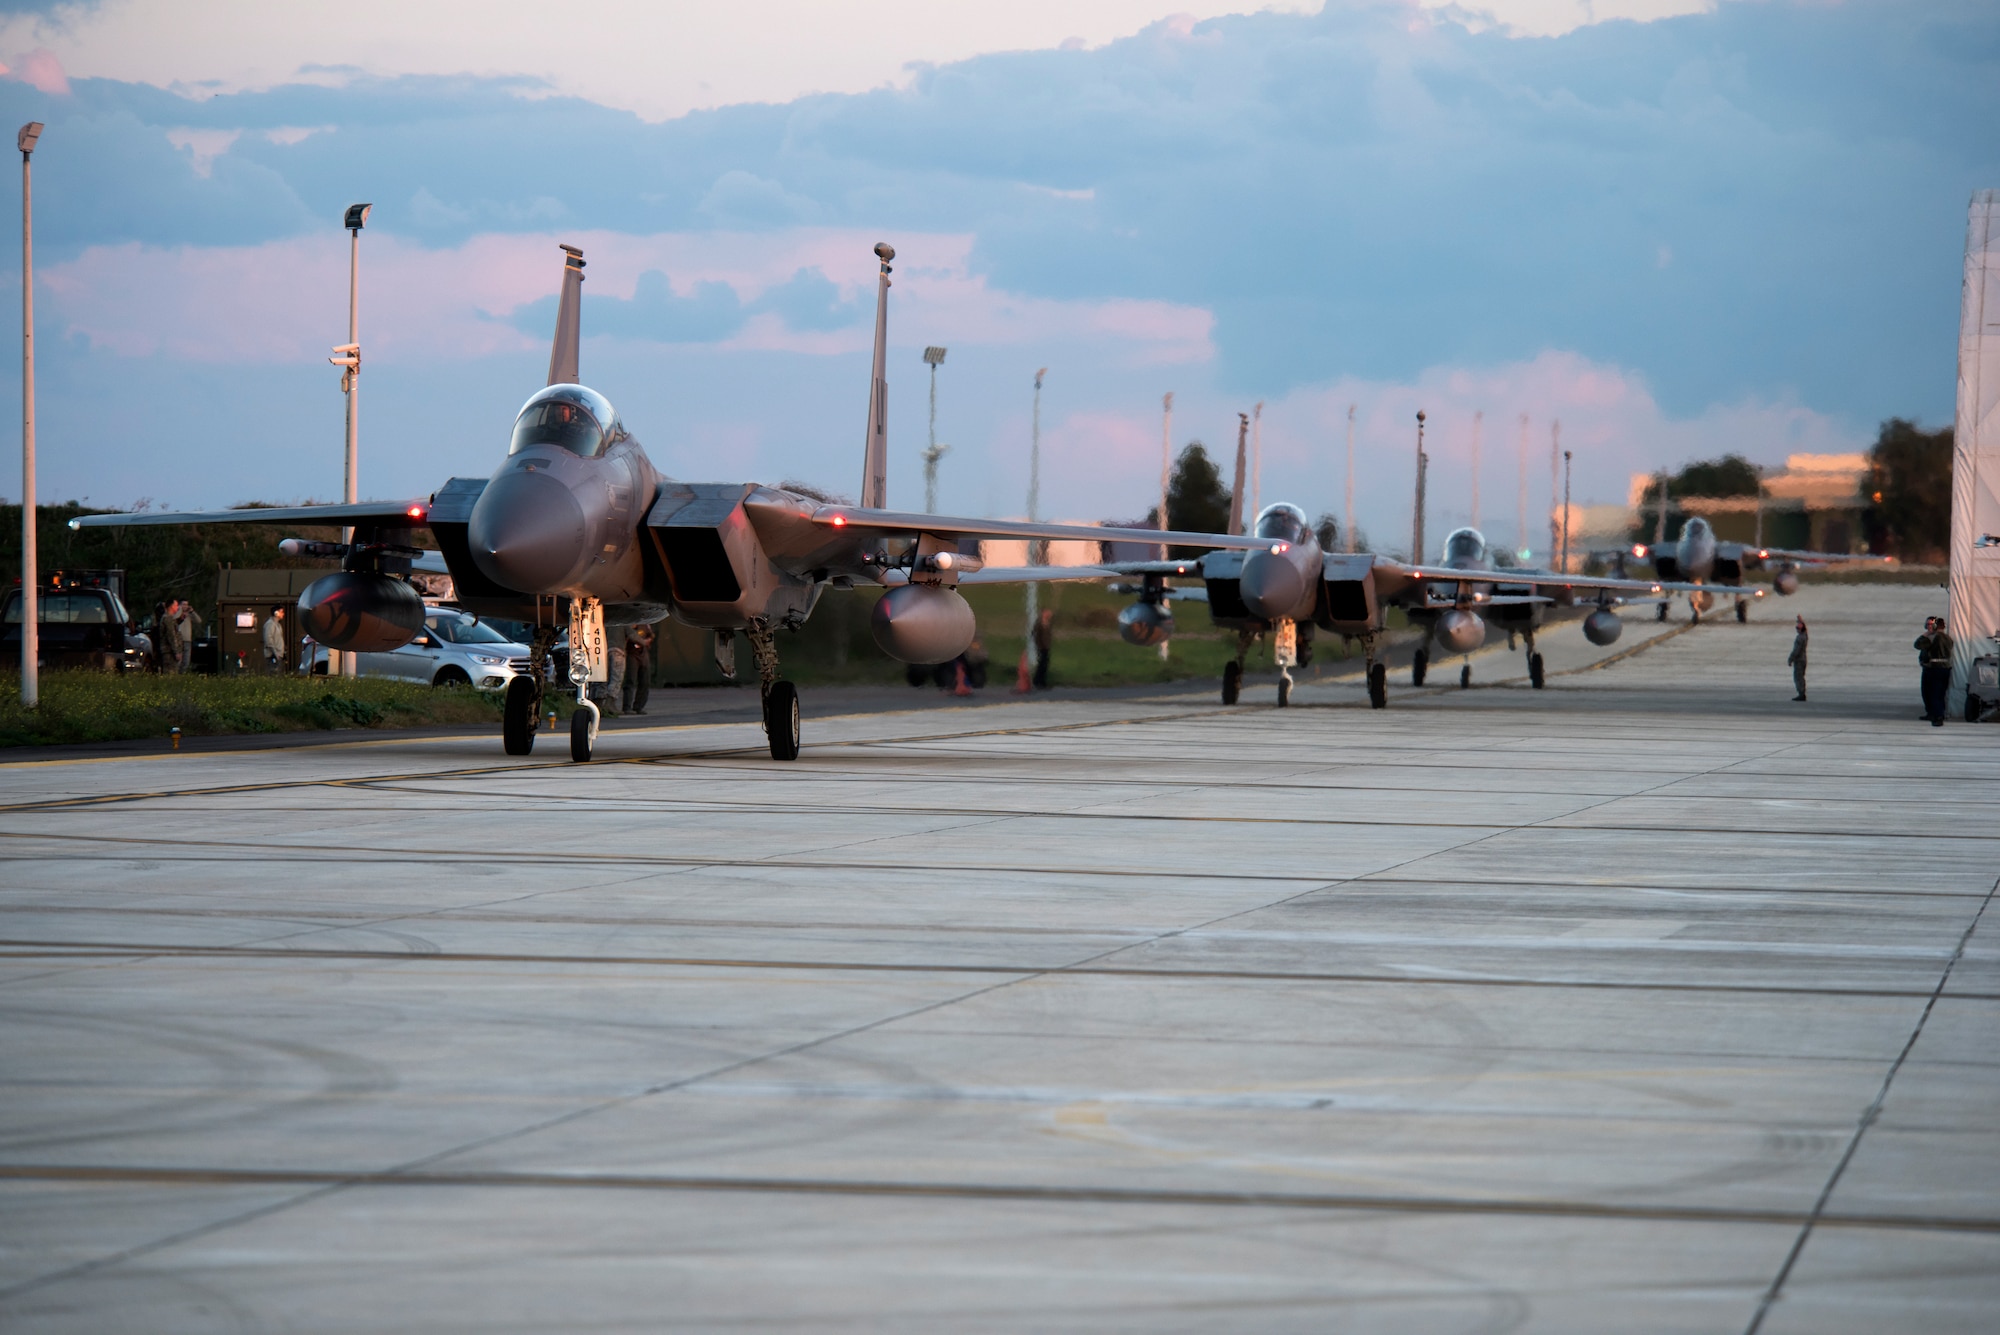 Four F-15C Eagles assigned to the 493rd Fighter Squadron taxi at Amendola Air Base, Italy, Nov. 16, 2018. F-15C Eagles and an F-15D Eagle will be participating in the NATO Tactical Leadership Programme 18-4. TLP has prepared hundreds of NATO and allied forces’ flight leaders to be mission commanders. (U.S. Air Force photo/ Senior Airman Malcolm Mayfield)